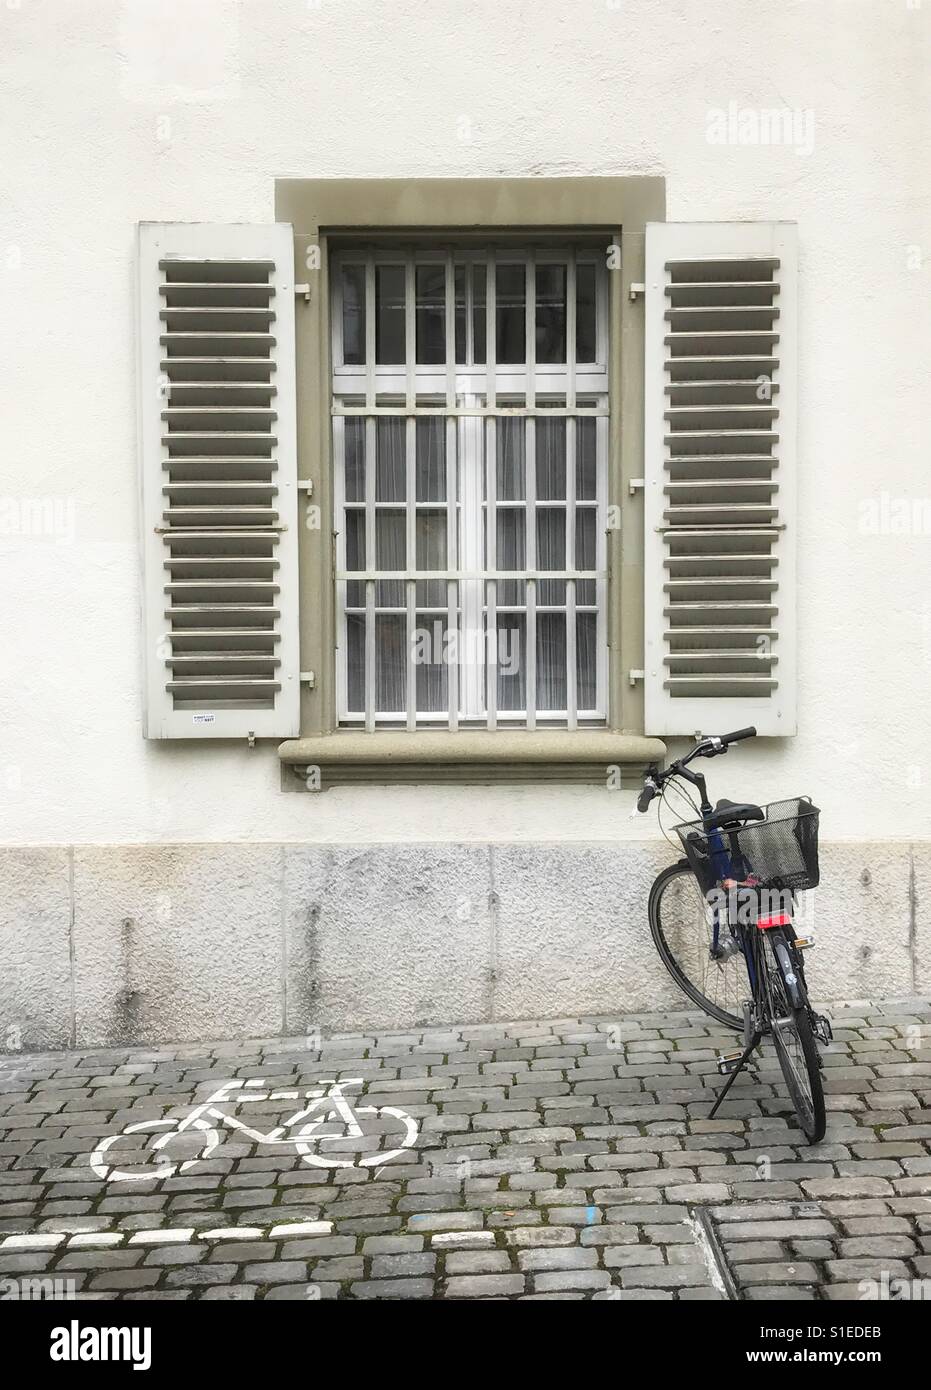 Bicycle parked on cobblestone pavement under window with security bars and shutters in Berne, Switzerland Stock Photo